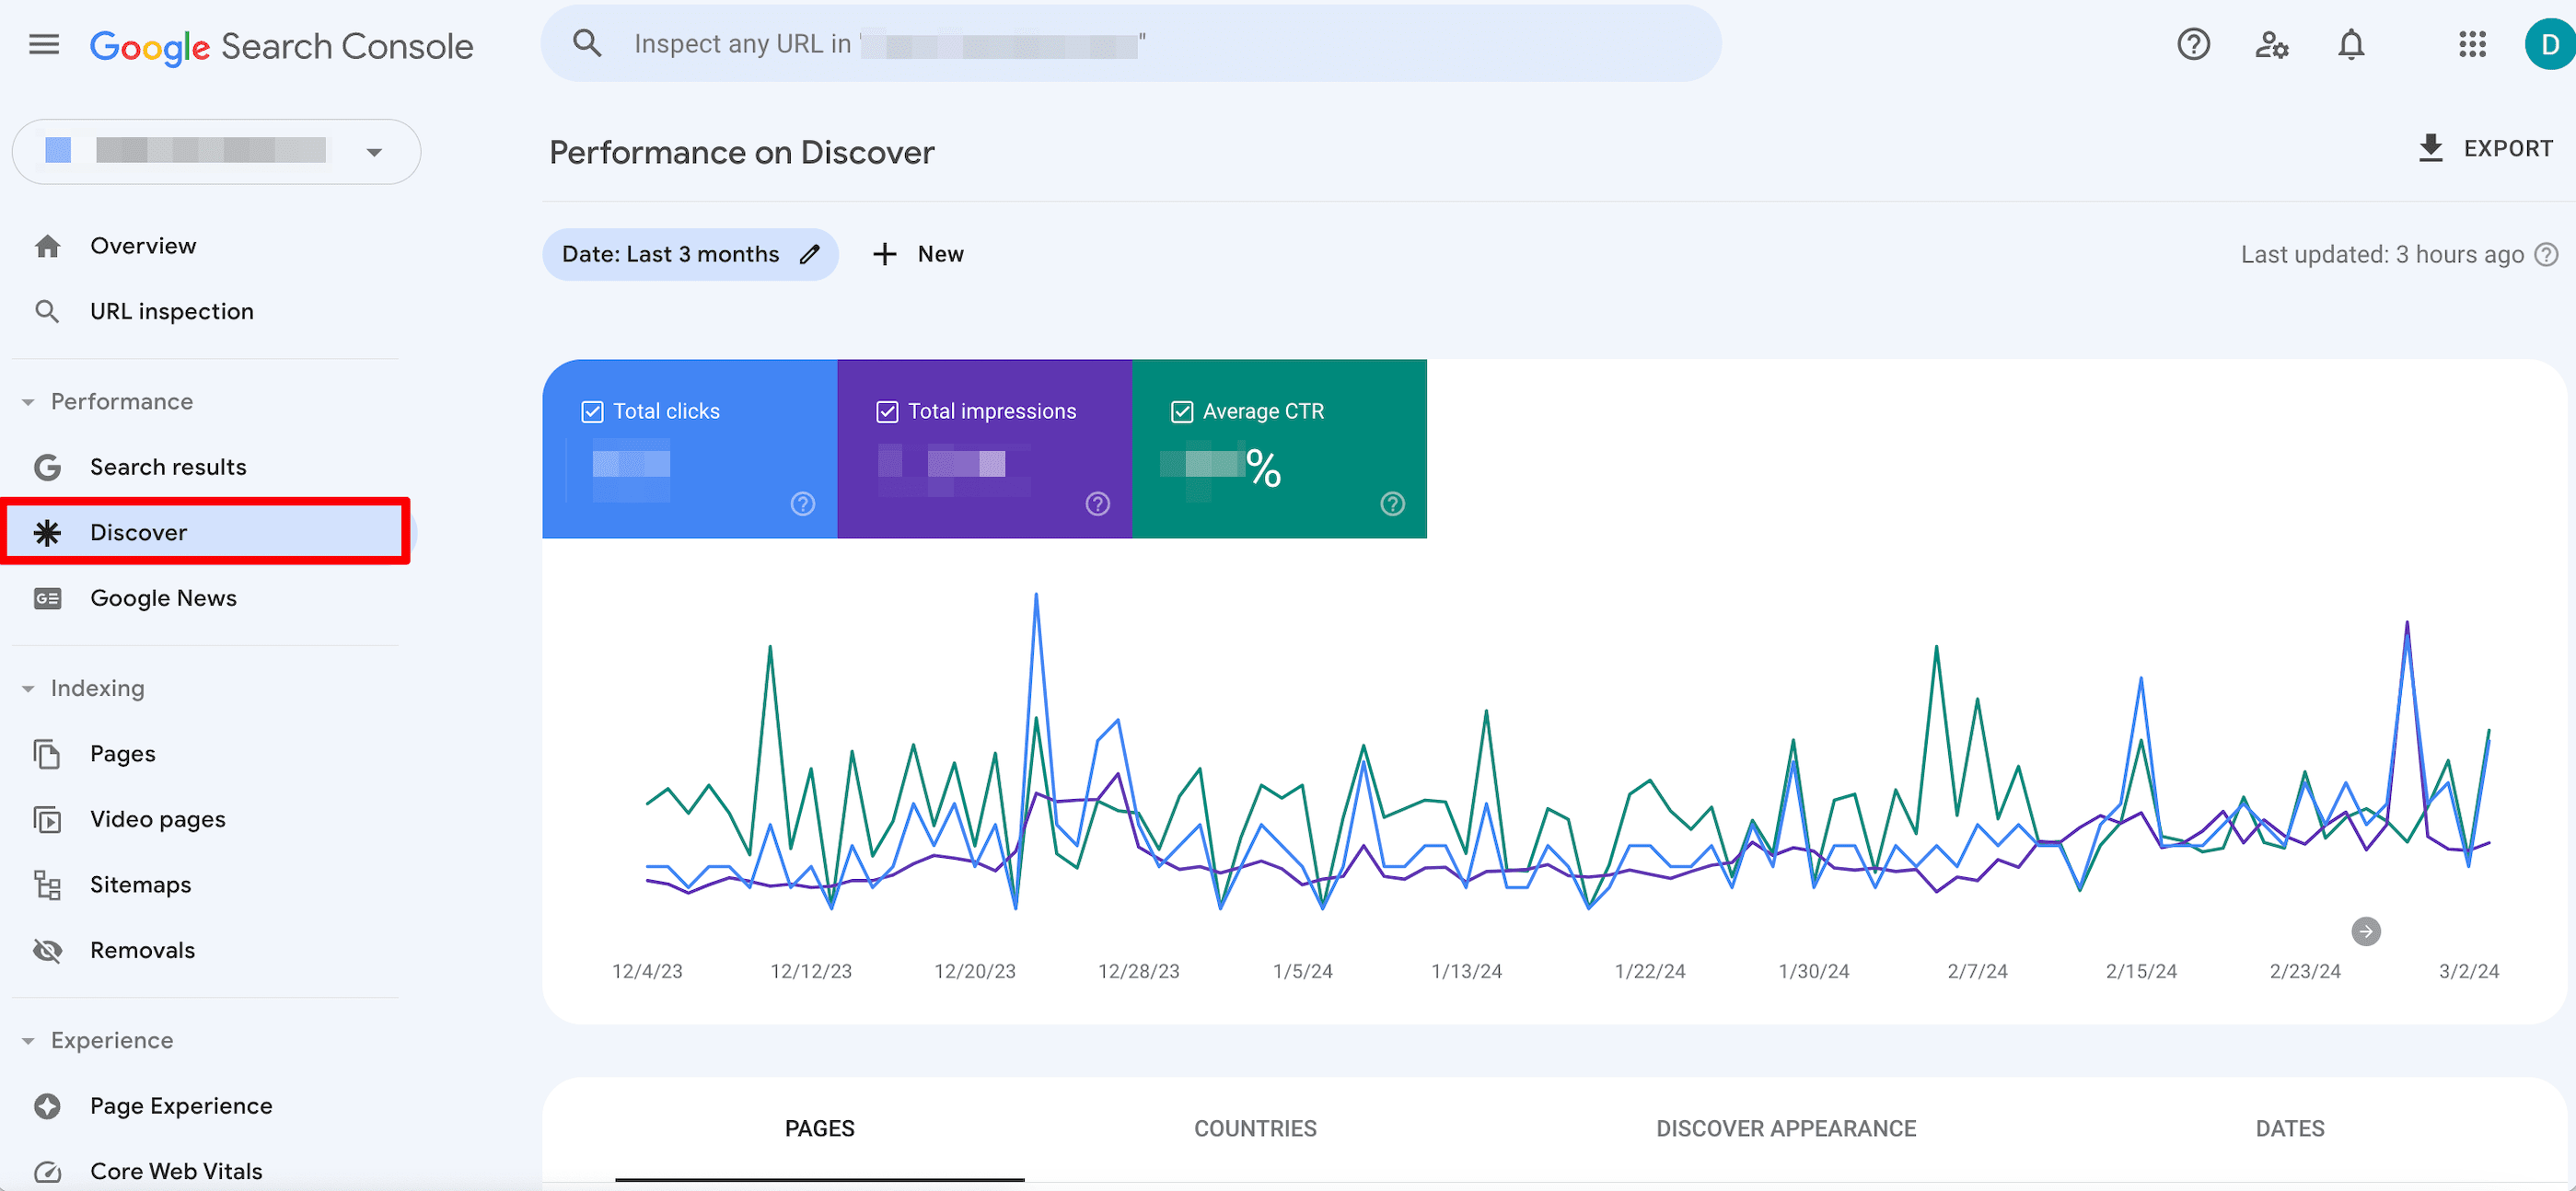 Google Search Console's Performance on Discover report